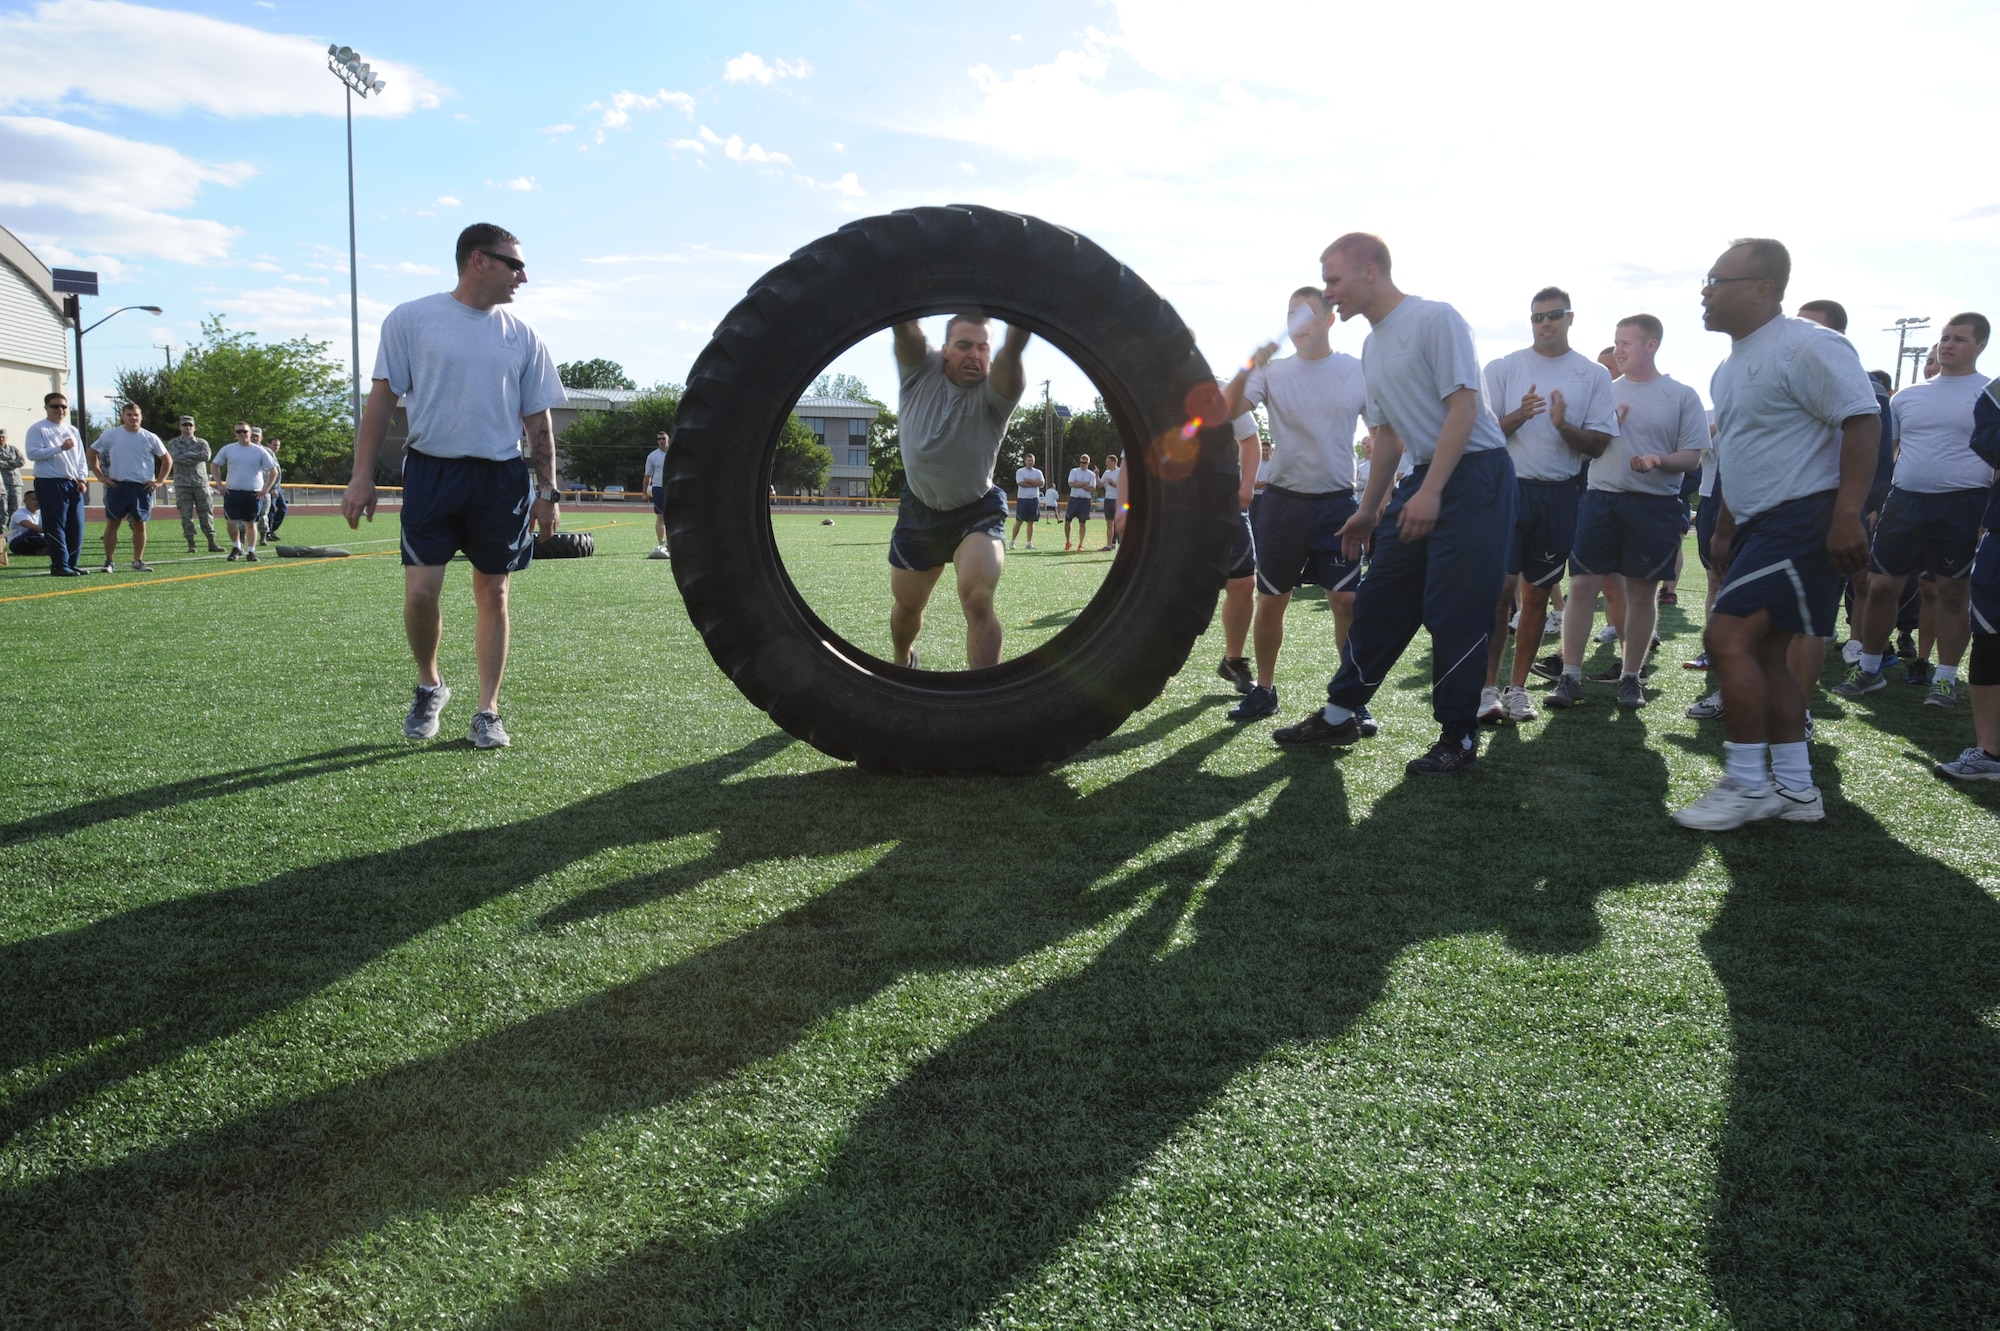 While participating in the Gunfighter Challenge, an Airman turns flips a tire during the physical fitness portion of the challenge June 13, 2013, at Mountain Home Air Force Base, Idaho. The teams raced each other in feats of strength and endurance. (U.S. Air Force Photo by Airman 1st Class Malissa Lott/Released)